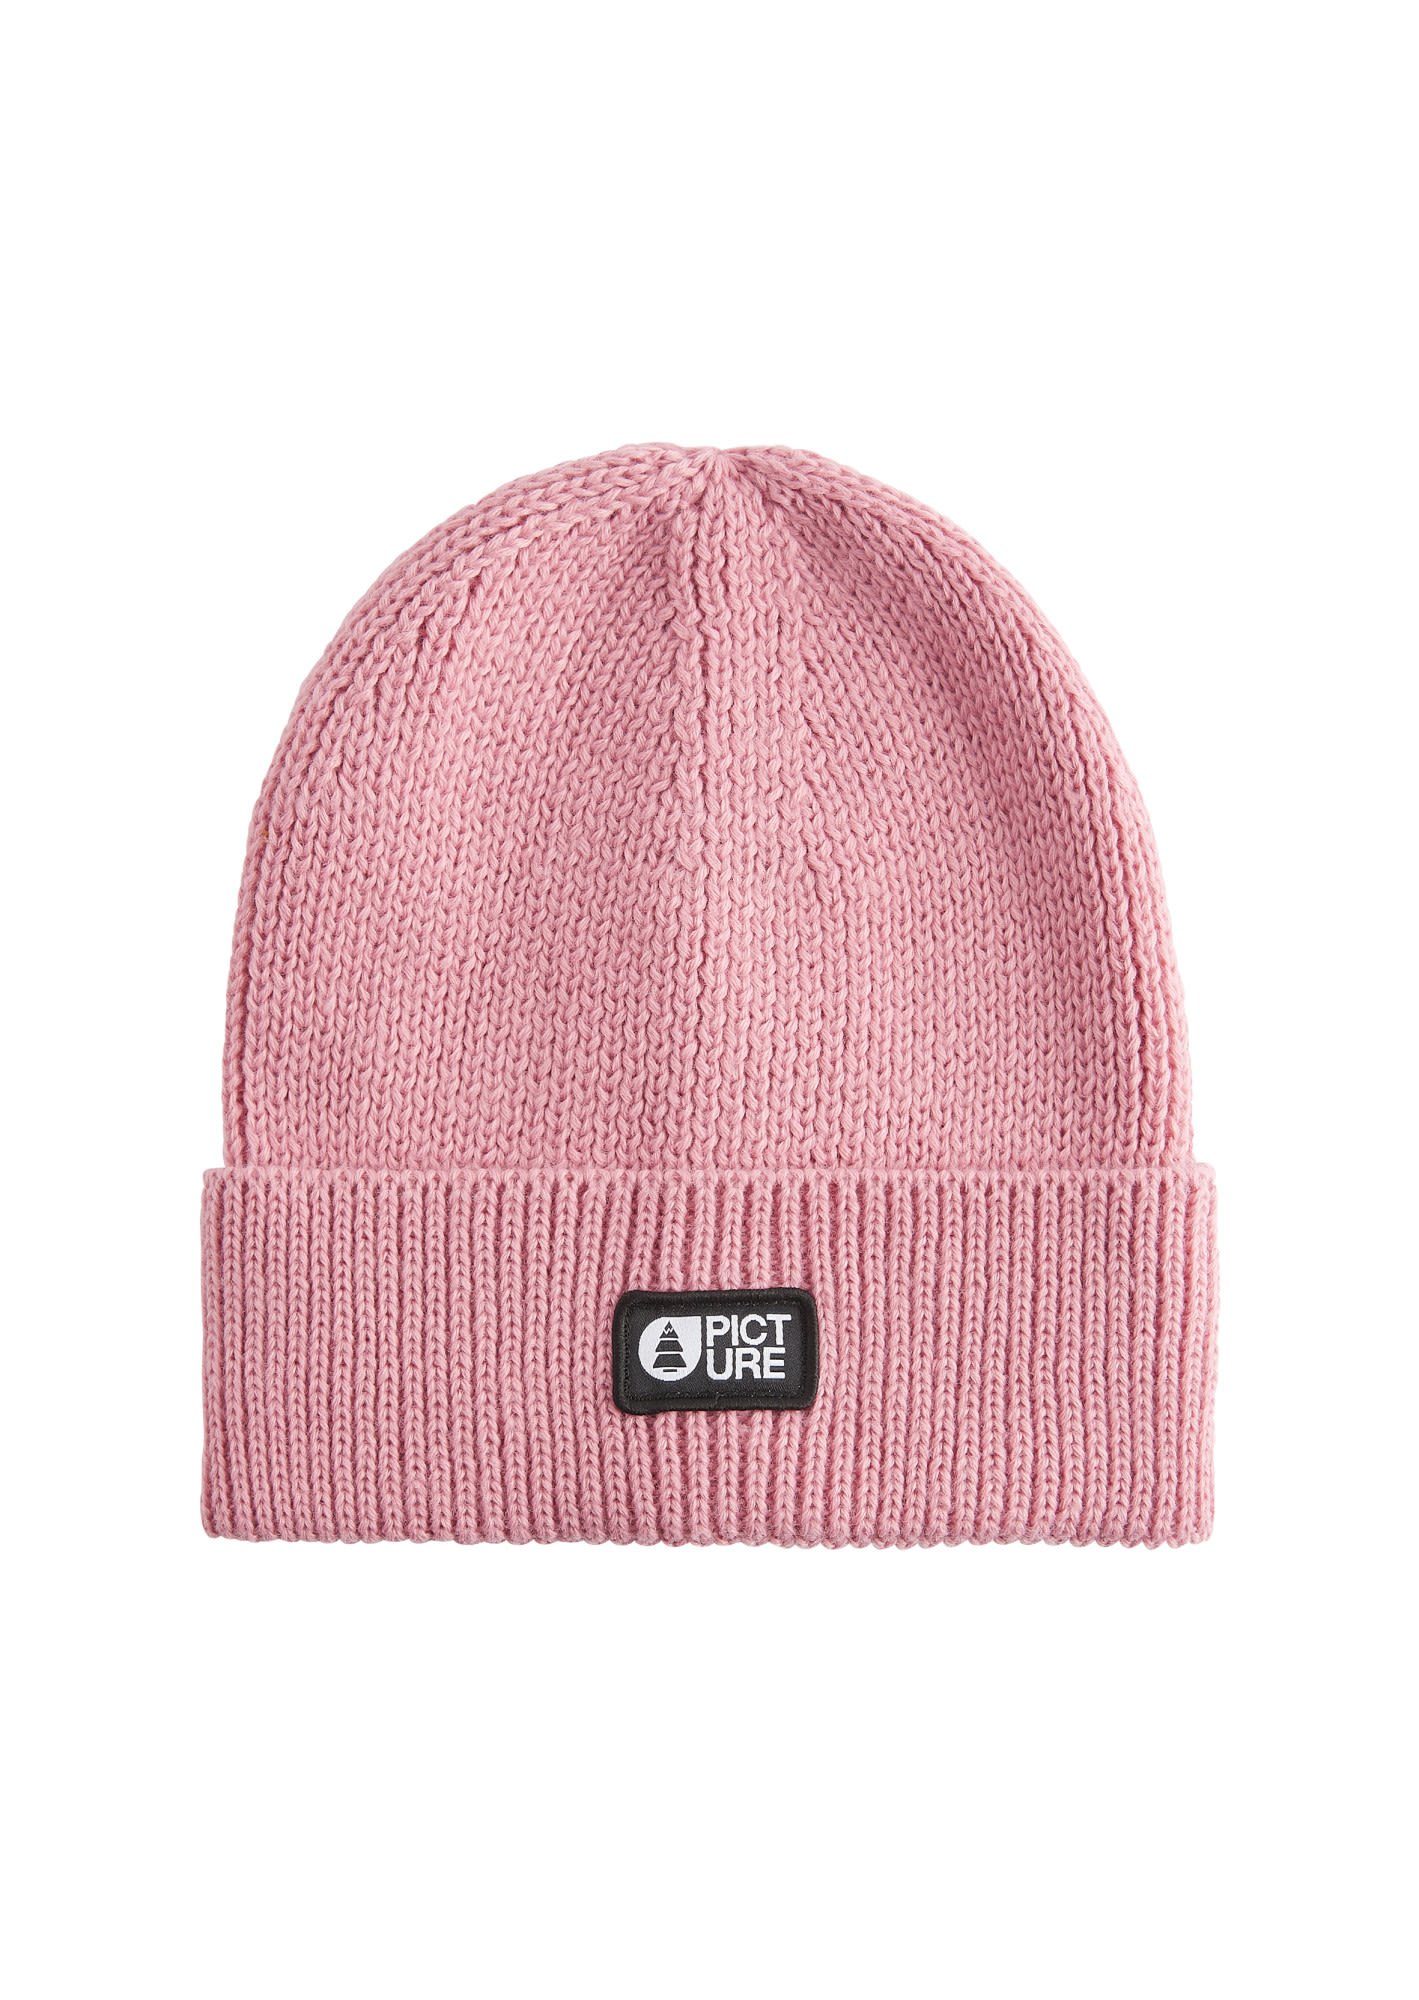 Beanie Colino Accessoires Picture Picture Rose Cashmere Beanie